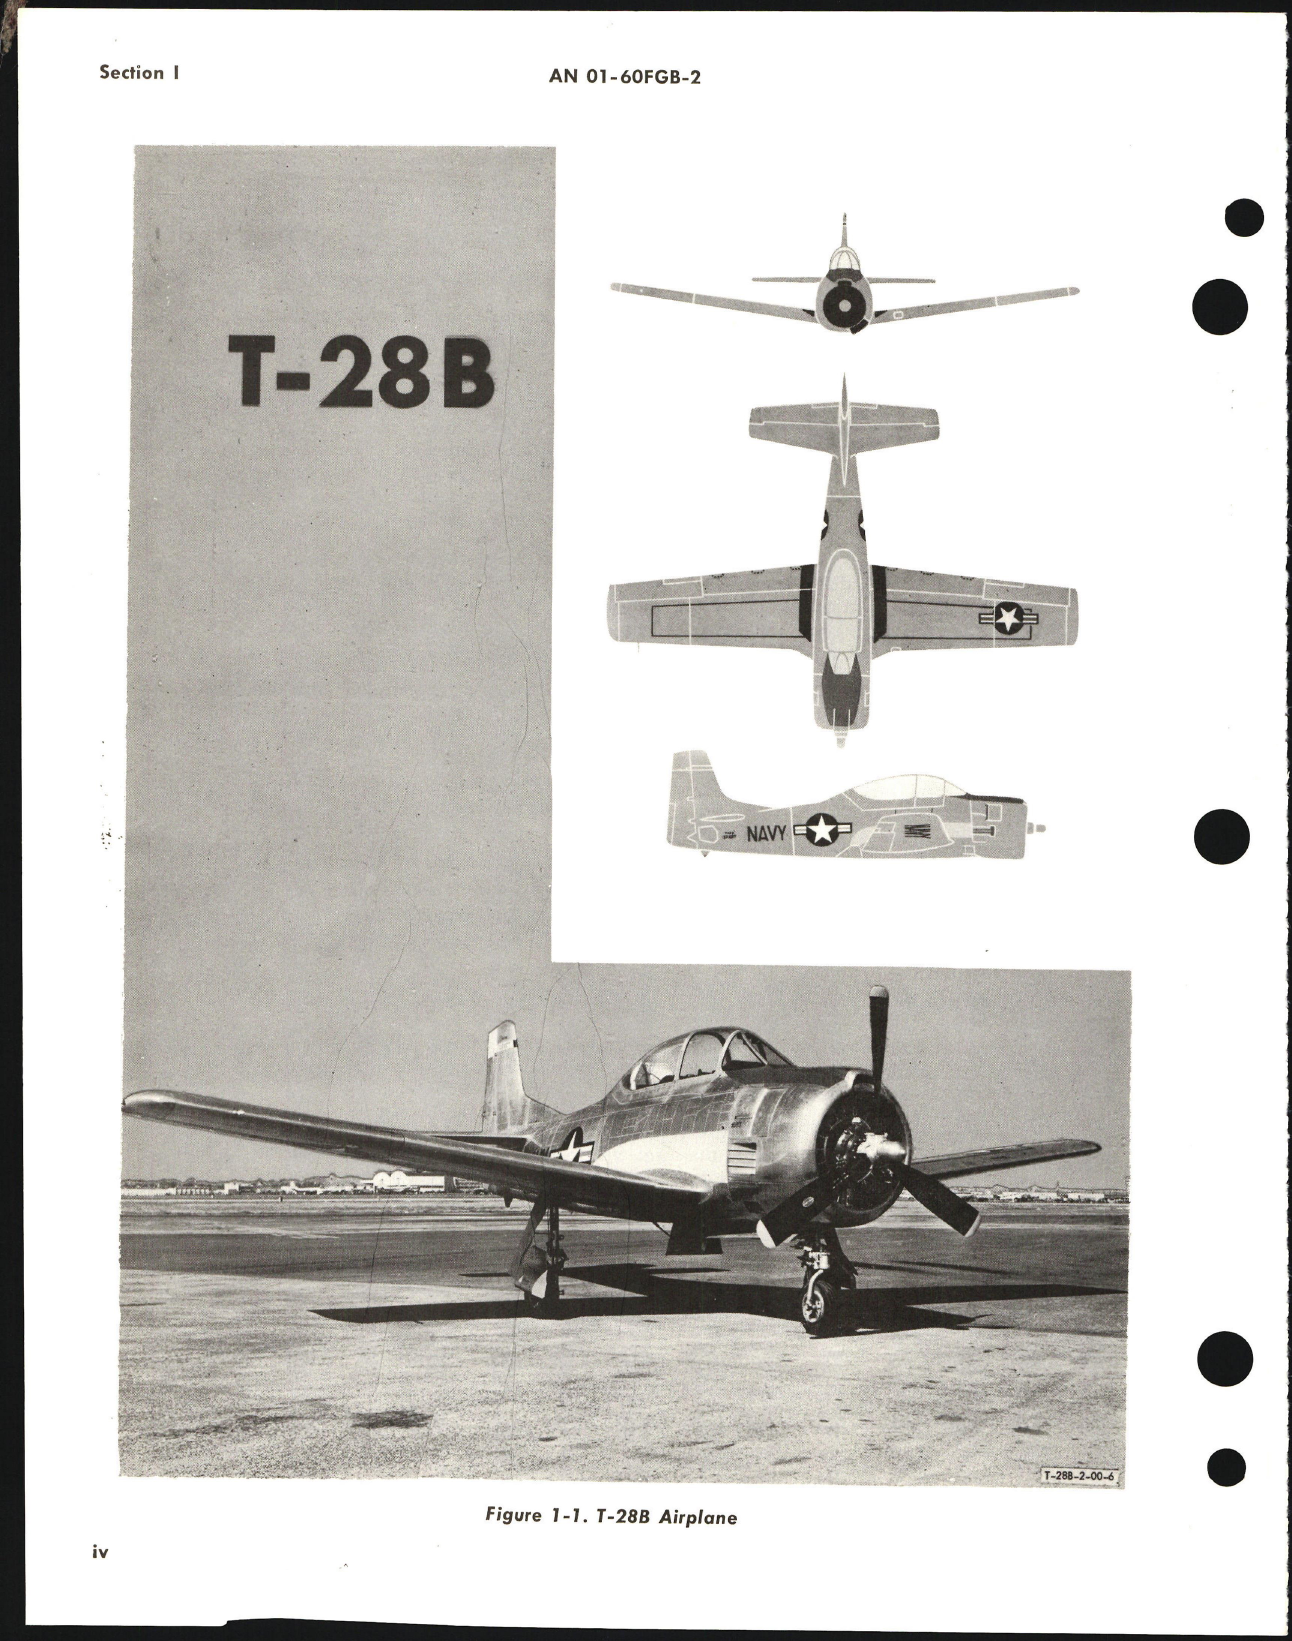 Sample page 6 from AirCorps Library document: Maintenance Instructions for T-28B and T-28C